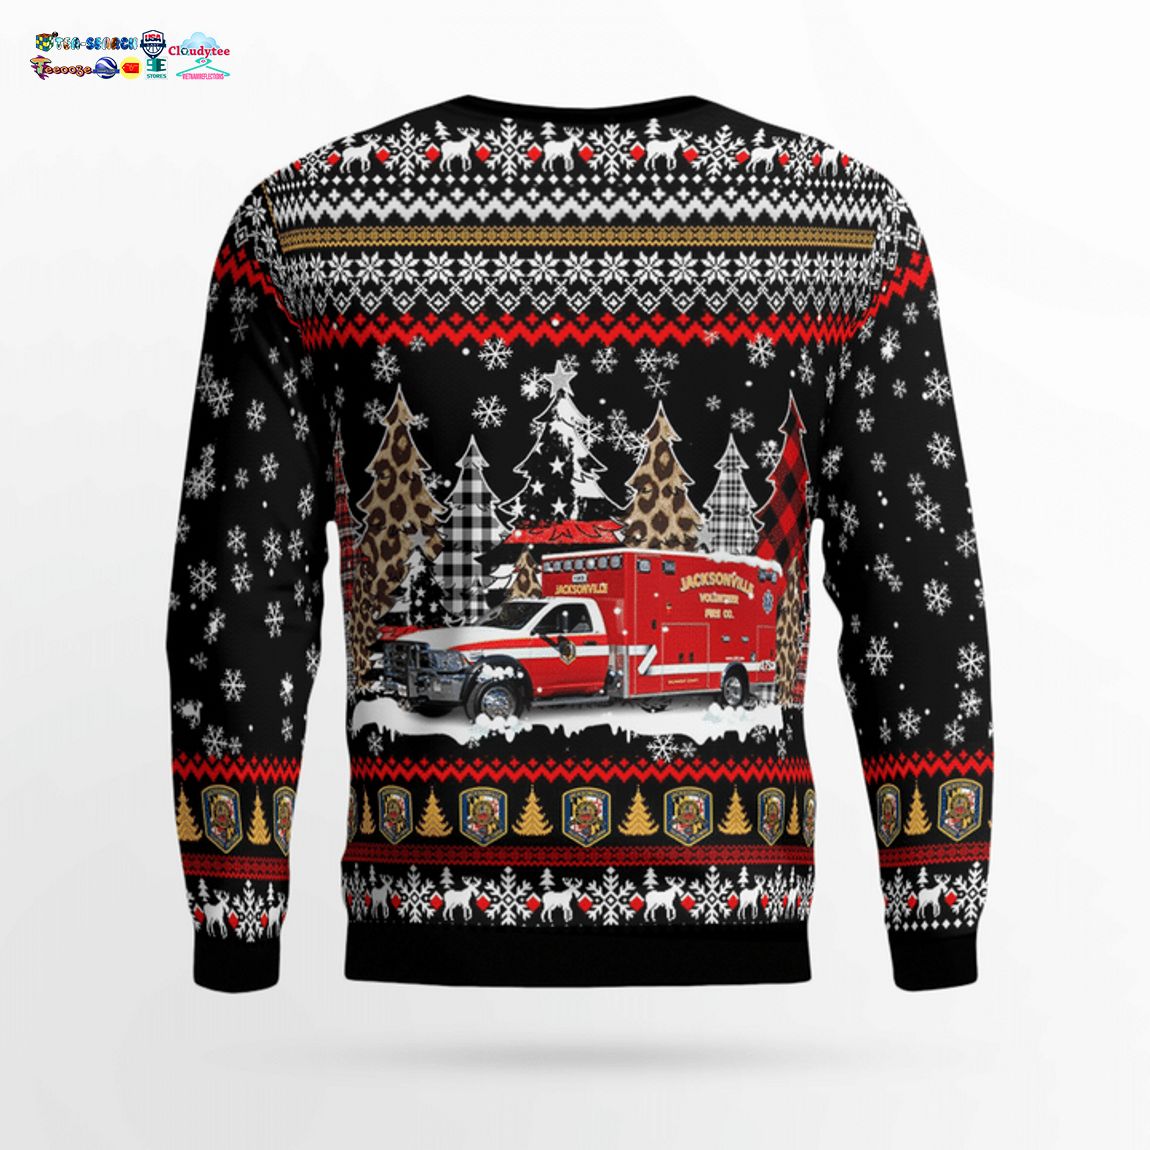 Maryland Jacksonville Volunteer Fire Company Station 47 3D Christmas Sweater